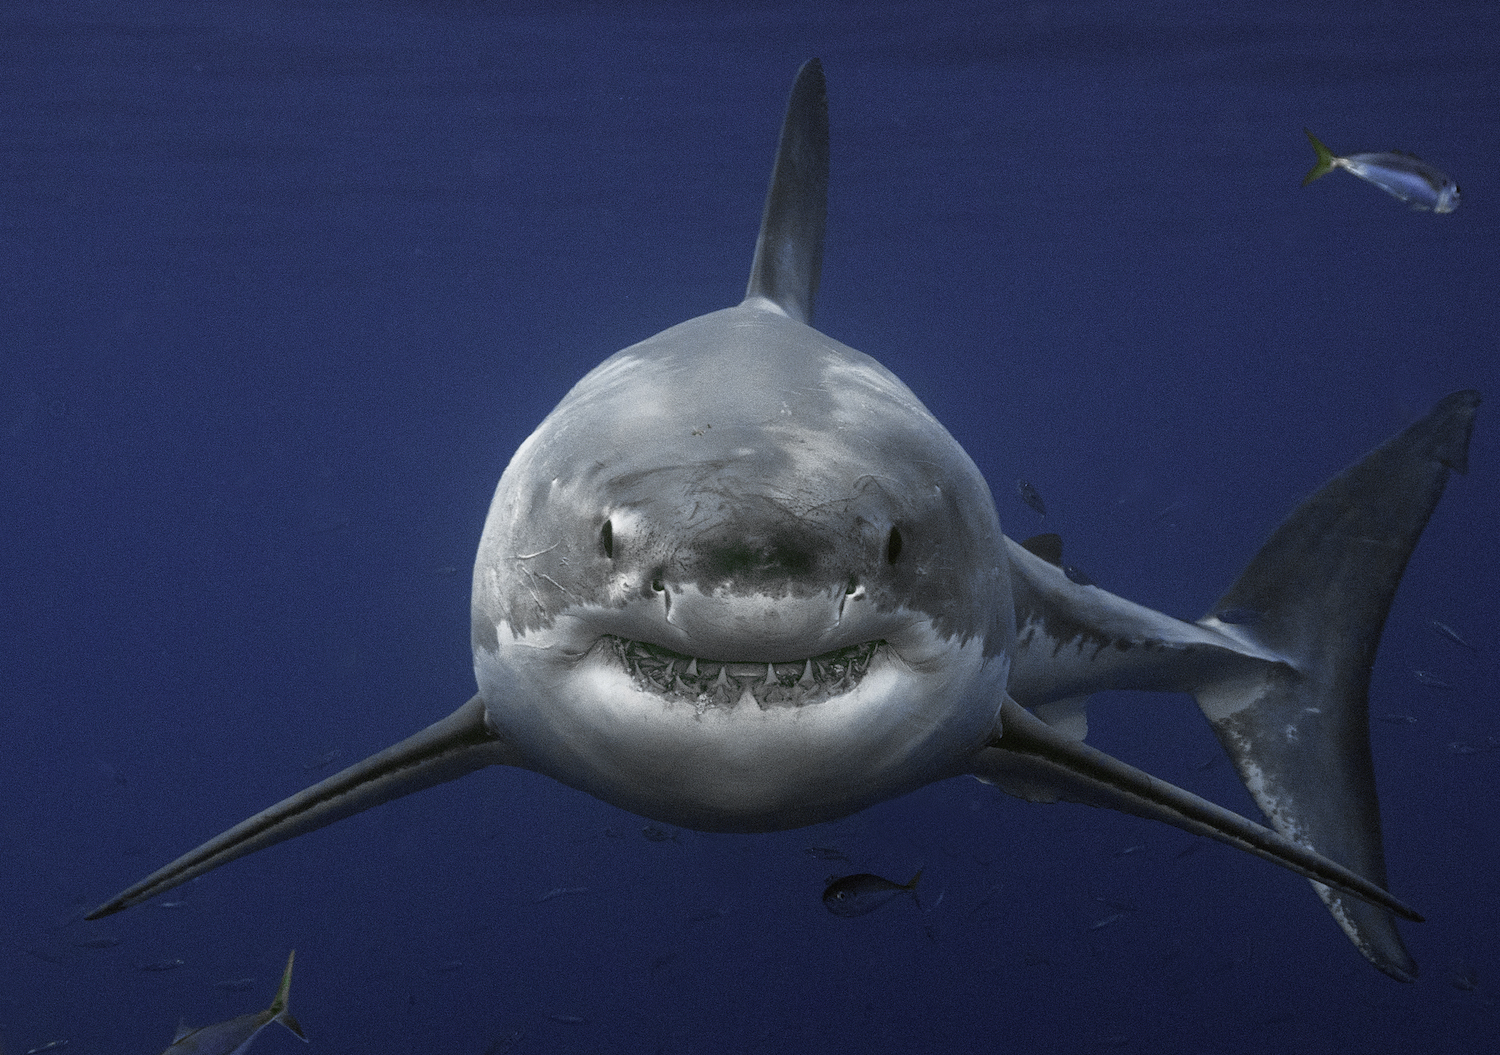 Shark Encounters Are on the Rise. Why?